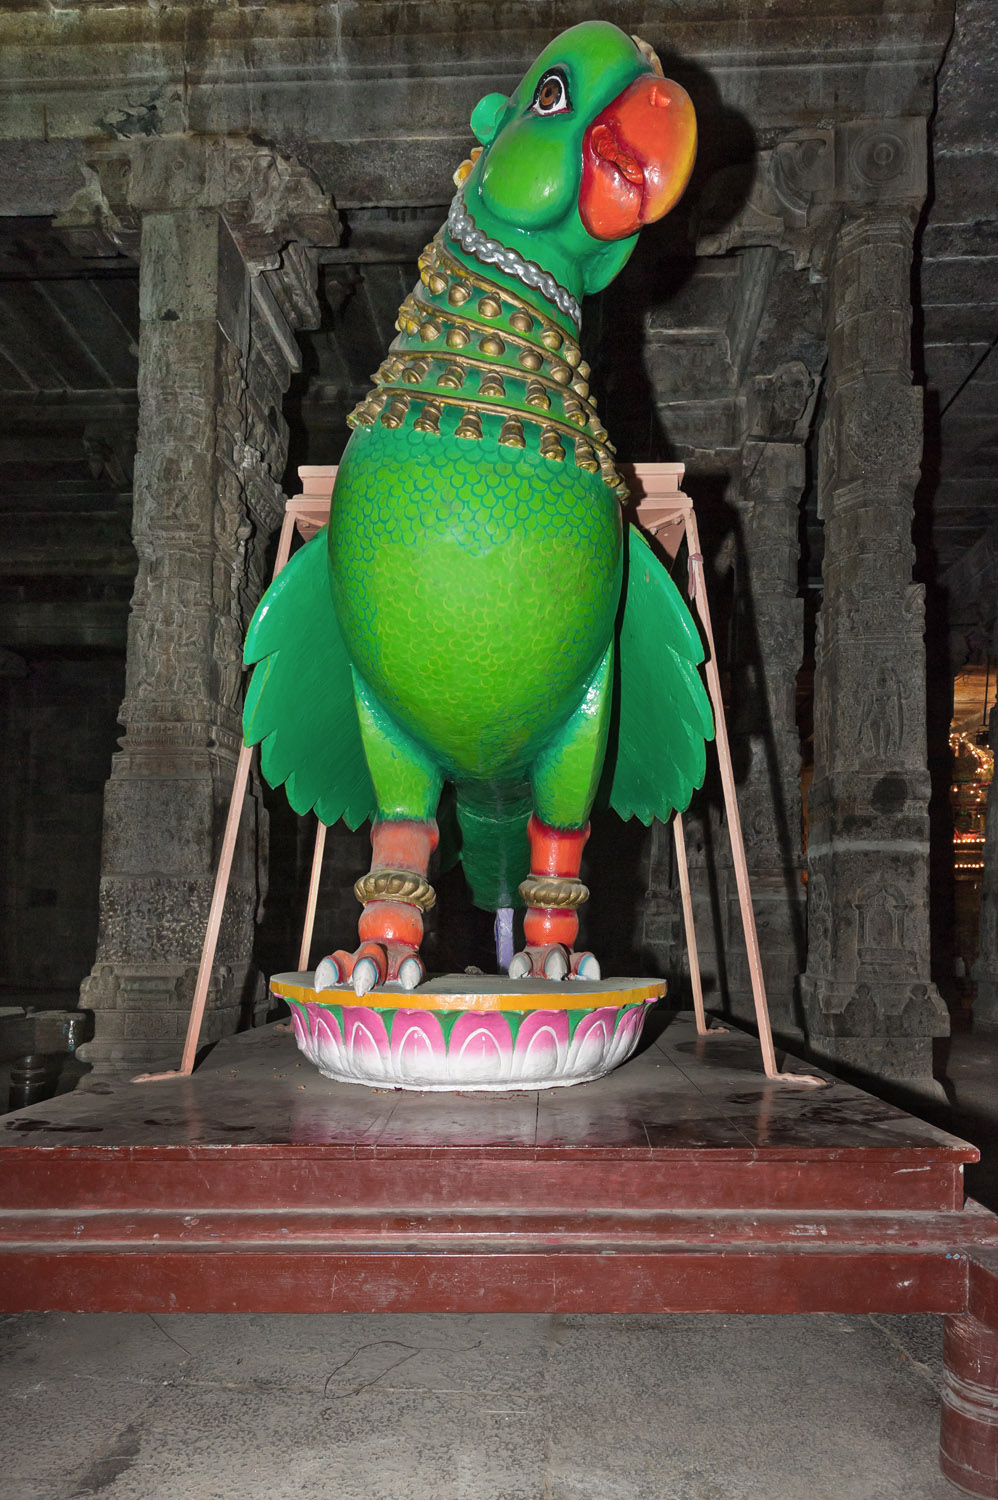 statue to carry on shoulders during religious ceremonies, Kanchipuram, Tamil Nadu